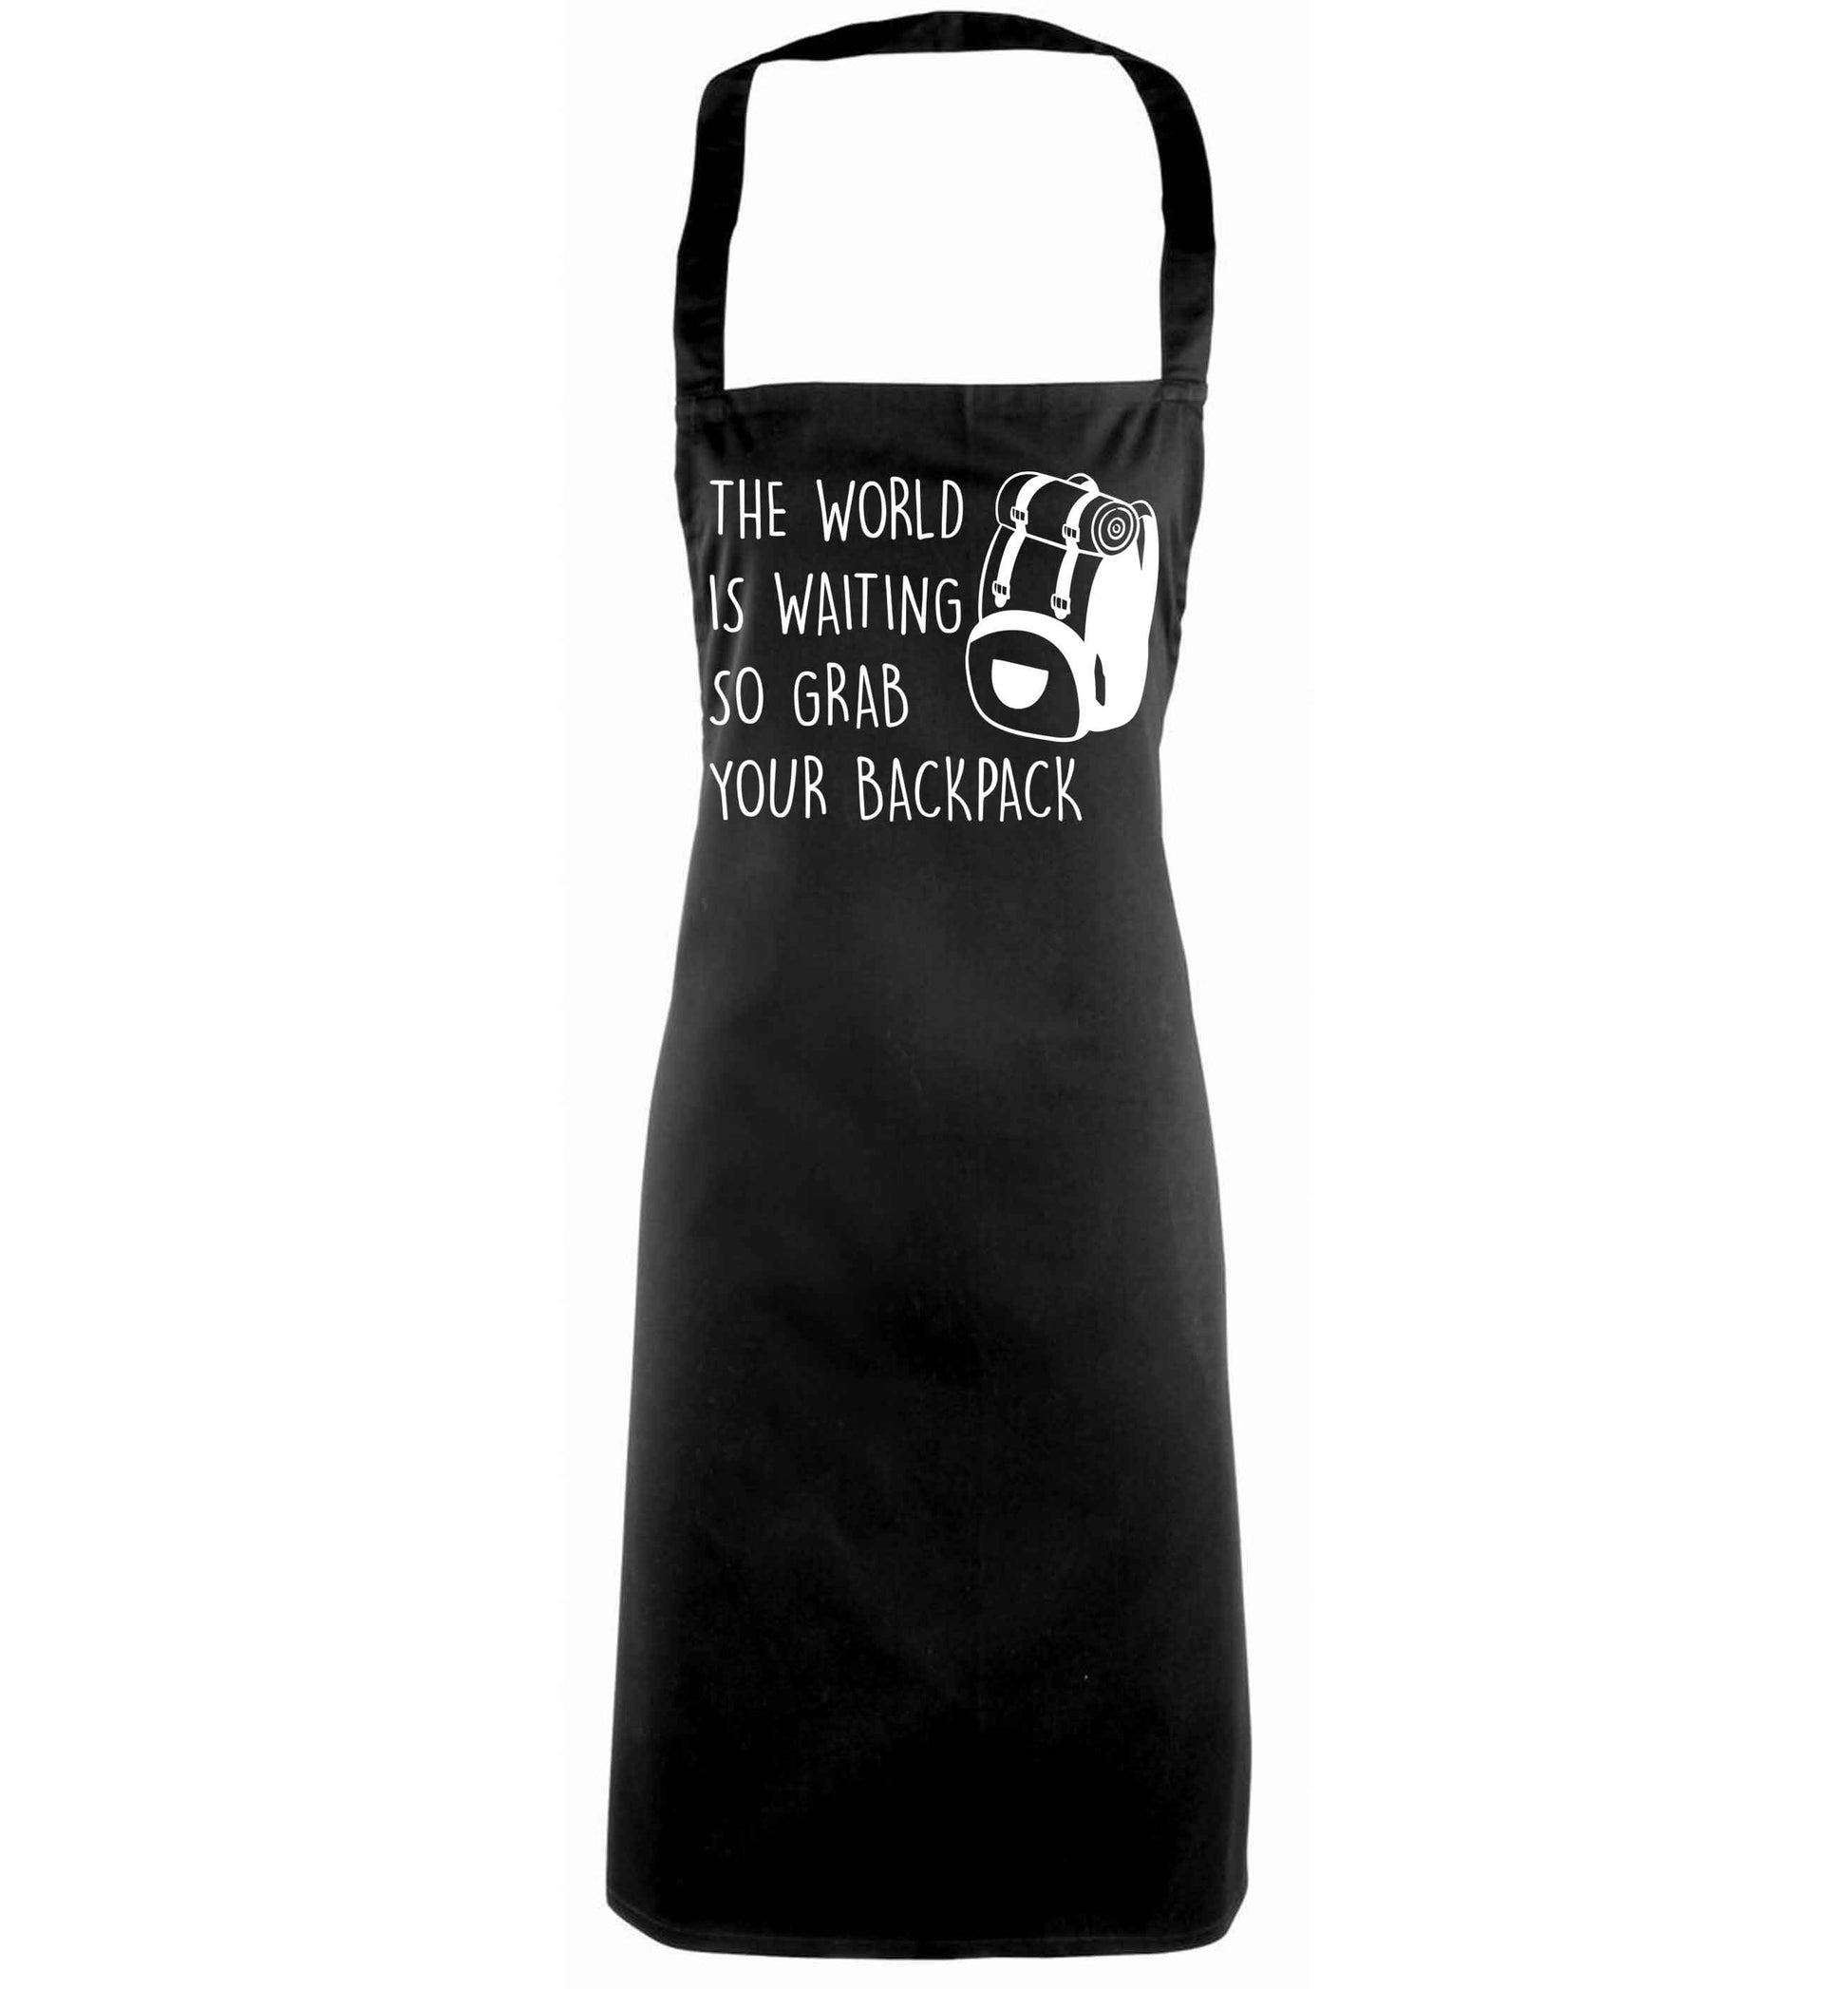 The world is waiting so grab your backpack black apron